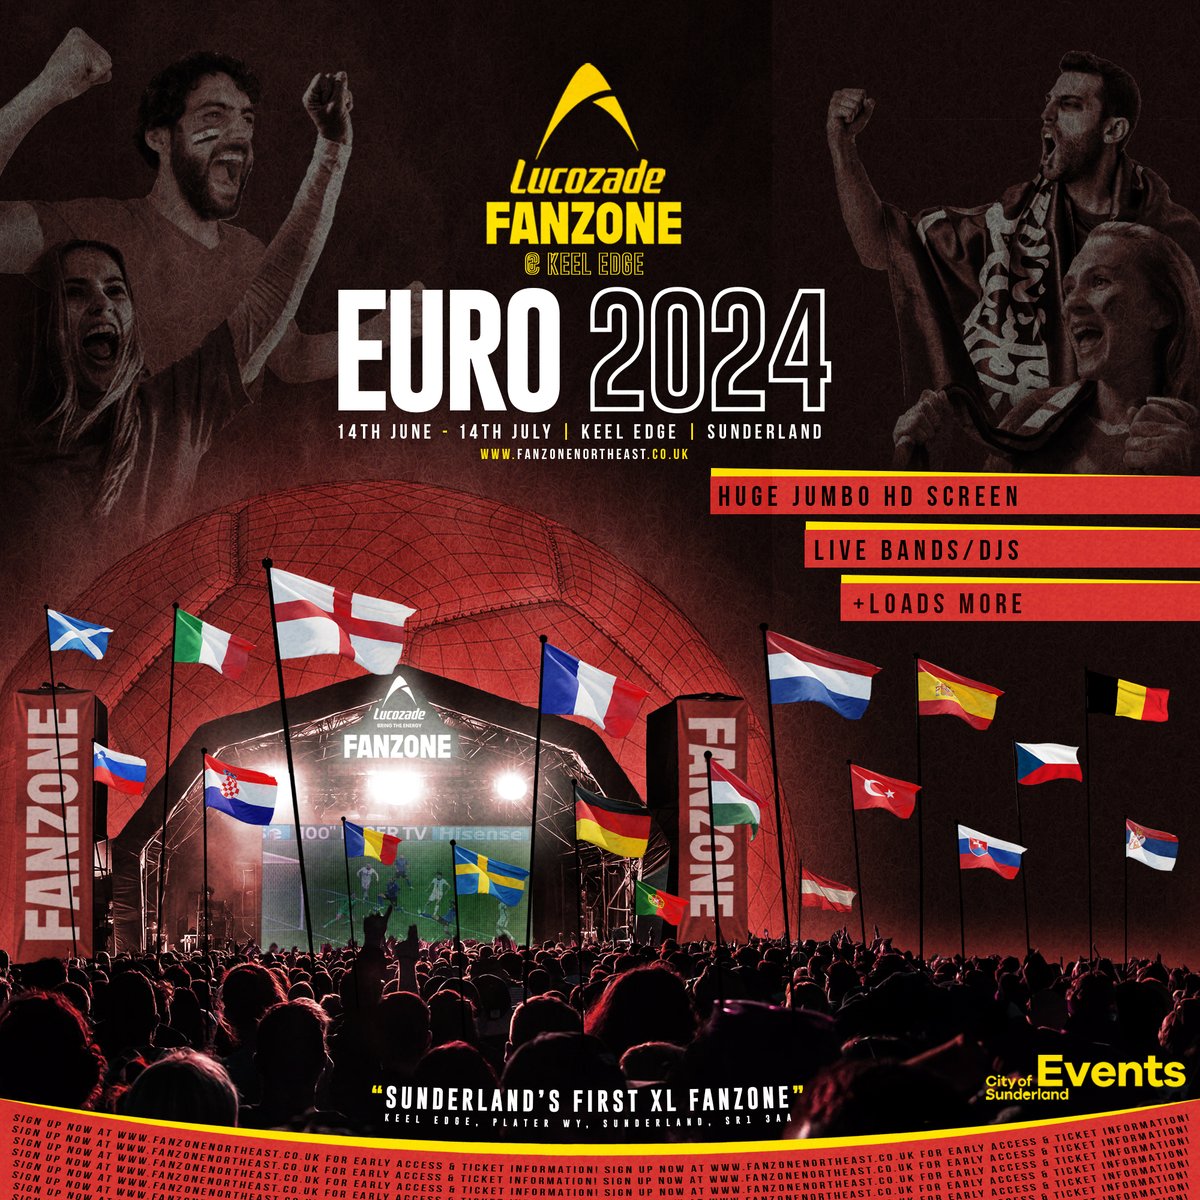 Football fever is set to sweep through Sunderland as Lucozade partners with Central Park to bring an electrifying atmosphere of EURO2024 to the city. ⚽ This will be Sunderland's first large-scale international sports tournament fanzone! Read more: orlo.uk/VbW43